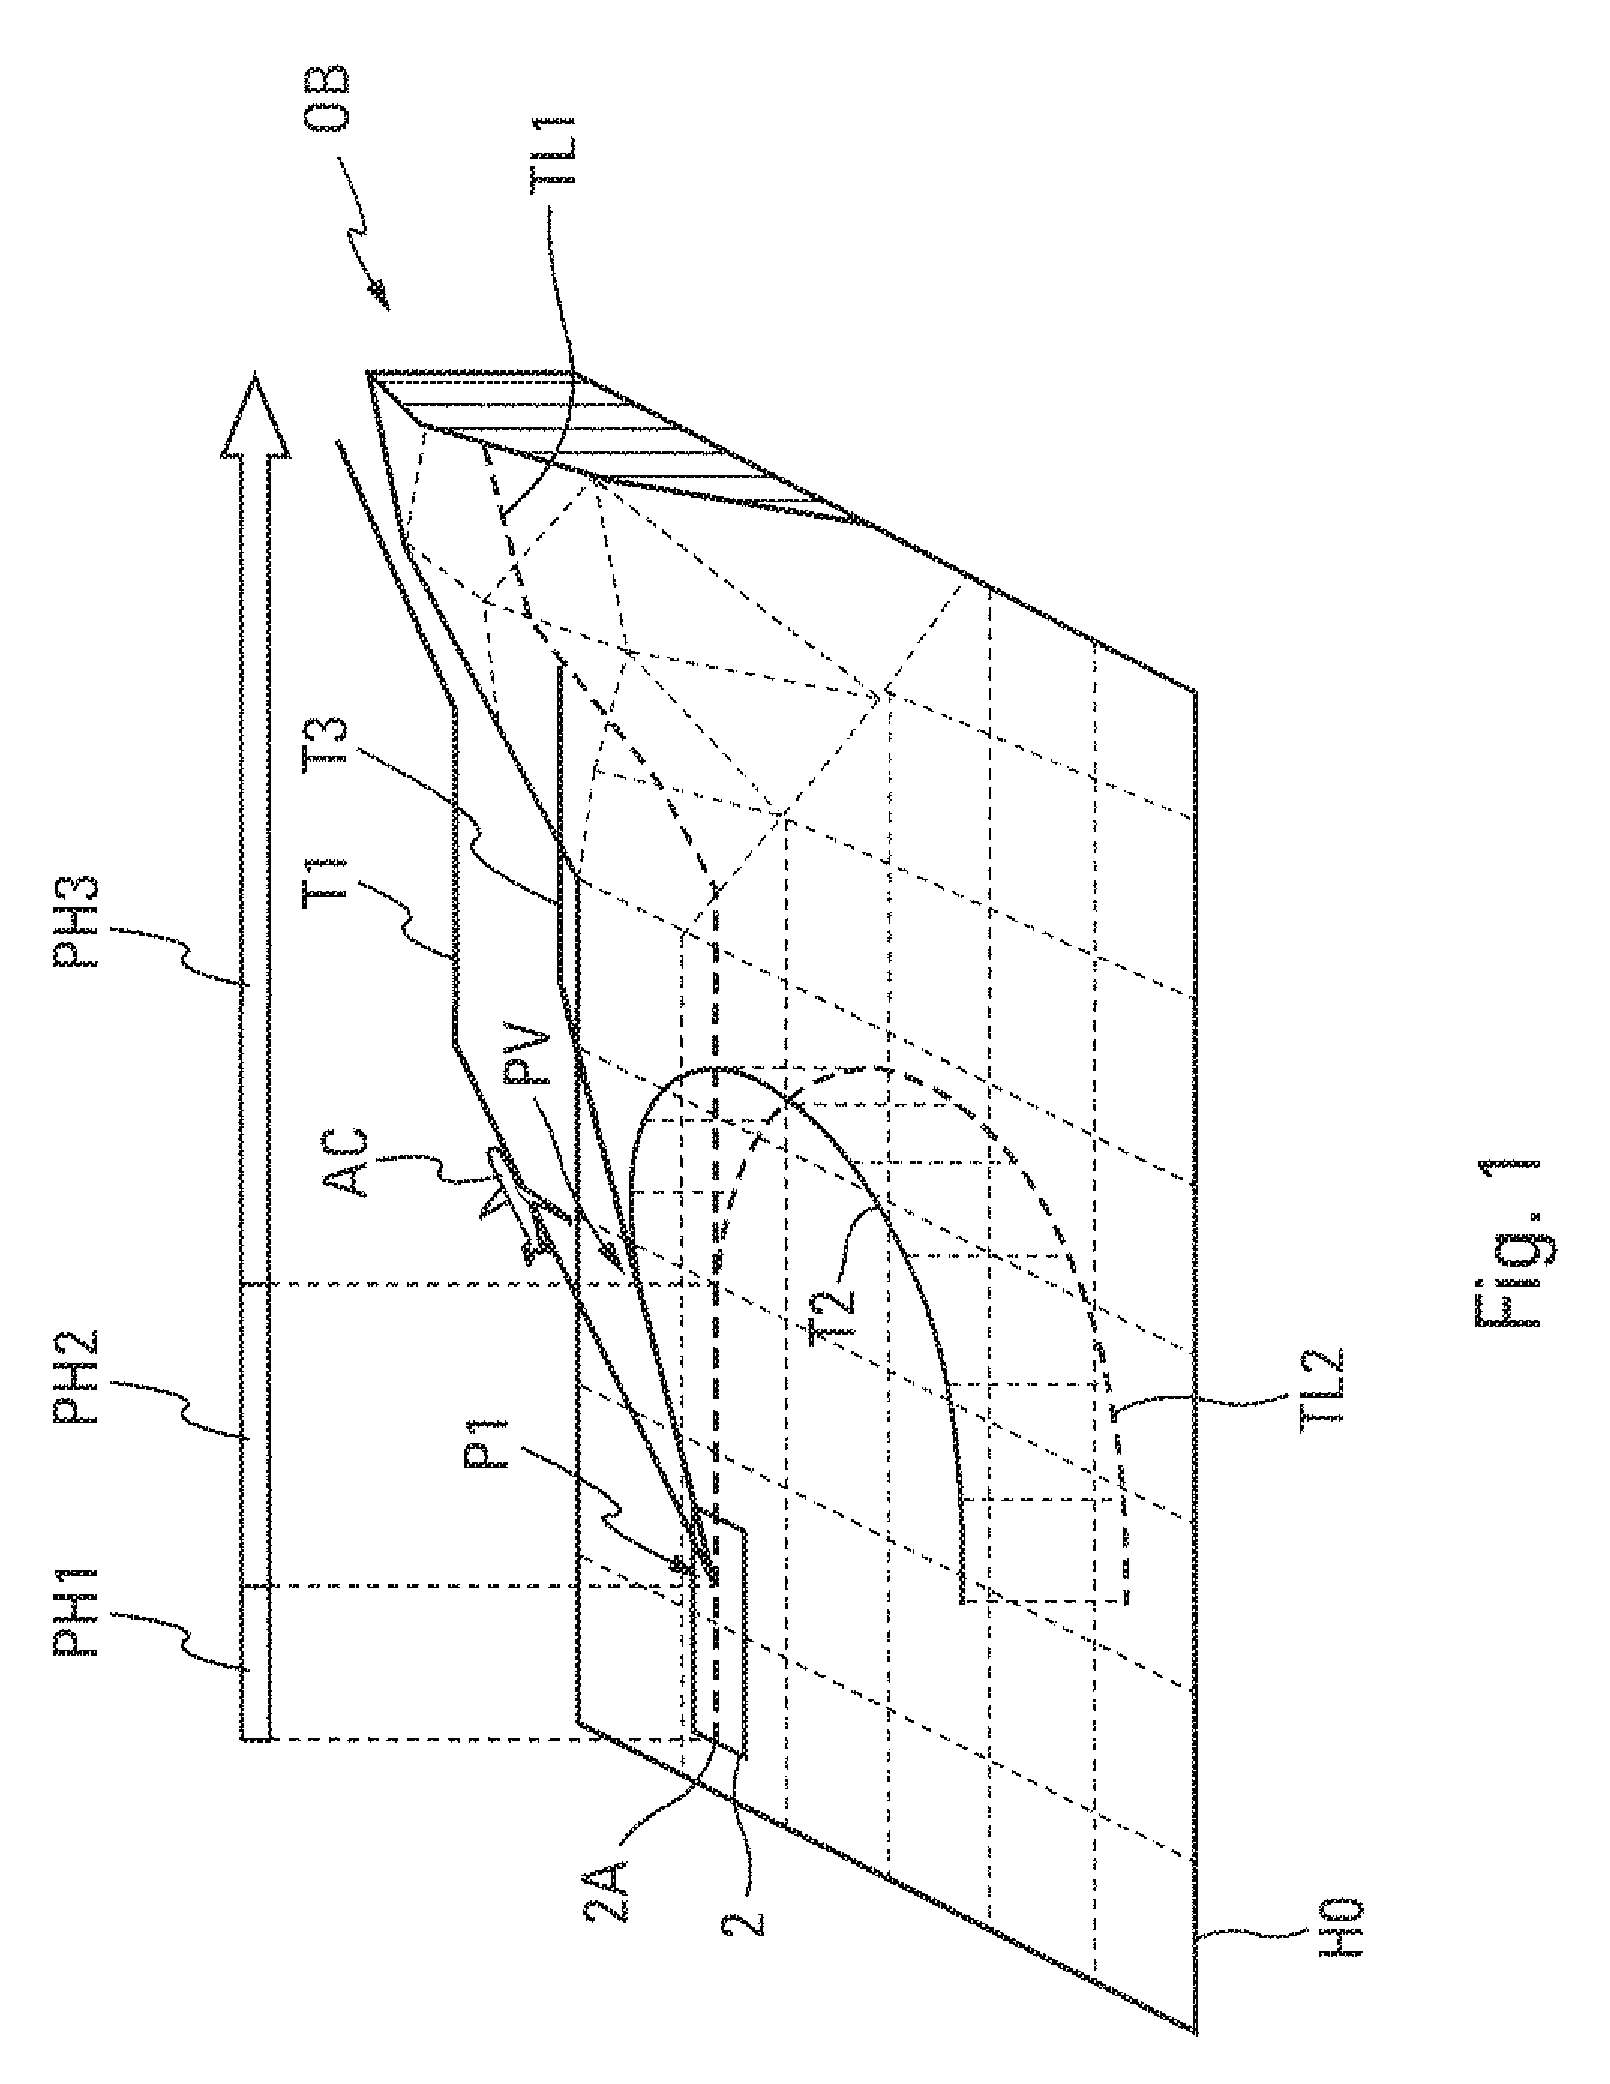 Method and device for determining a takeoff trajectory allowing to maximize the takeoff weight of an aircraft